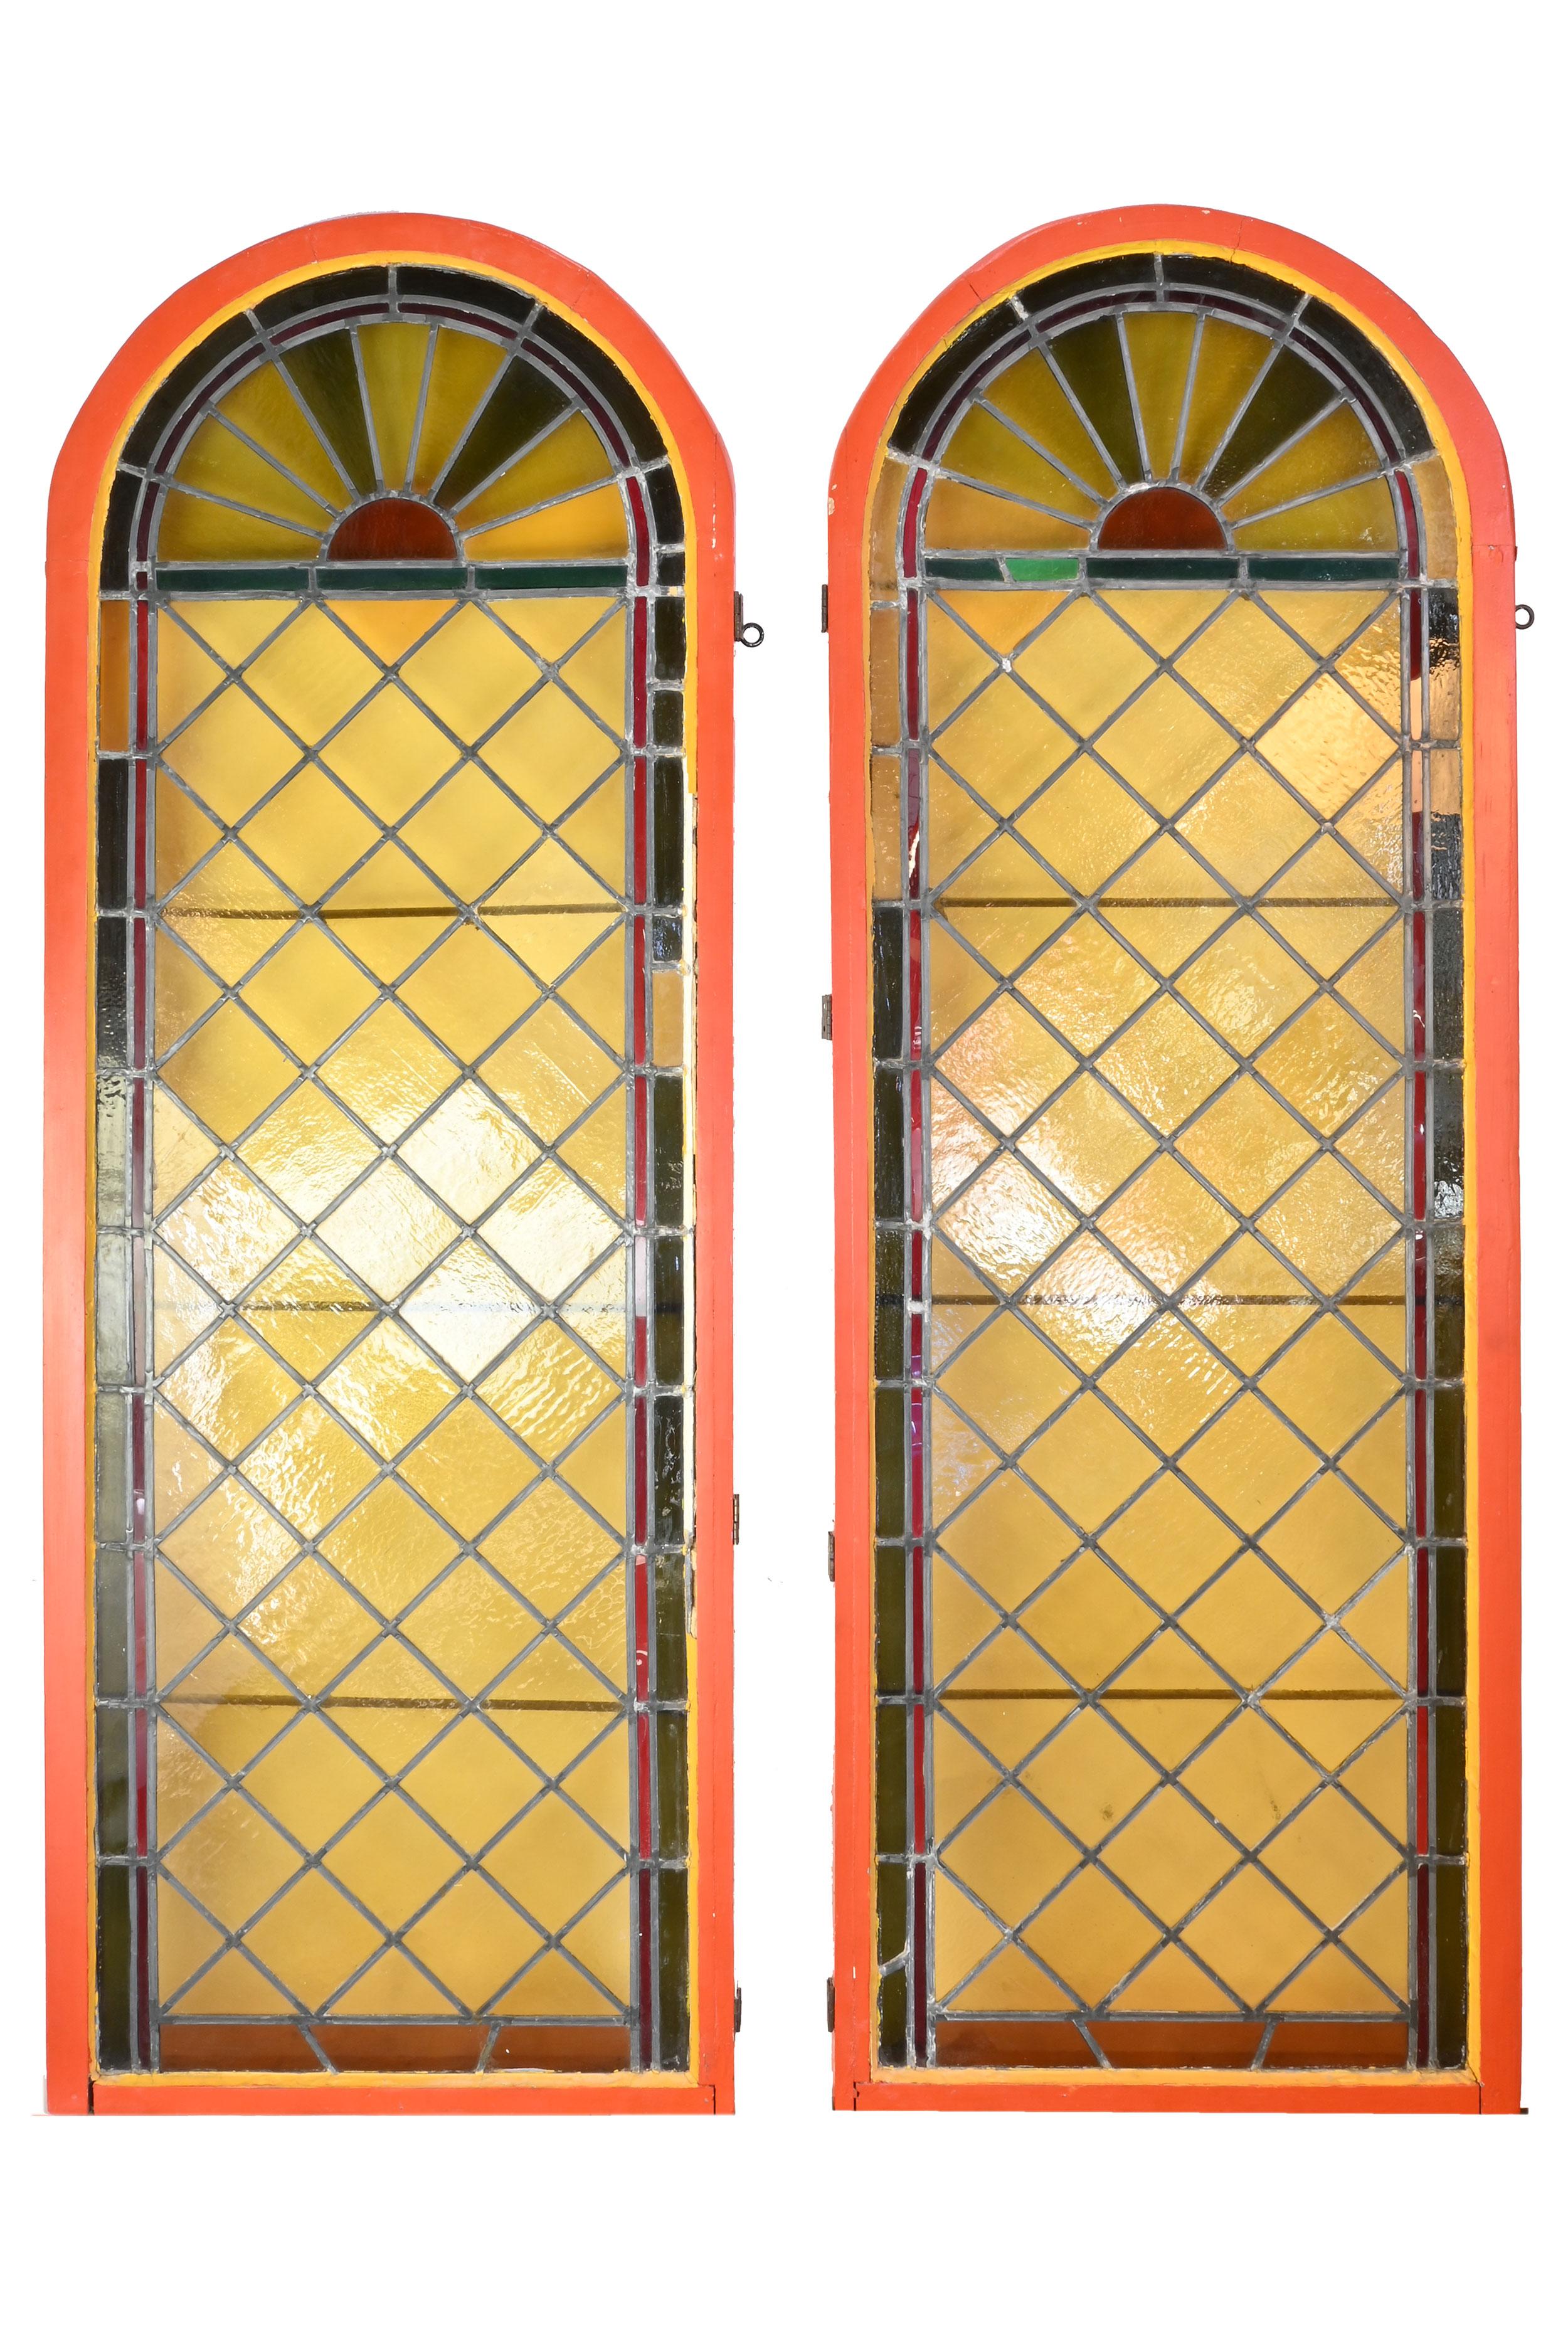 Incredible color and texture from these Amazing arch topped Victorian Sunburst windows, in frame. Every light that comes through creates its own glow through the gradient of the colored glass.

2 available, sold separately

AA# 61011
Circa: